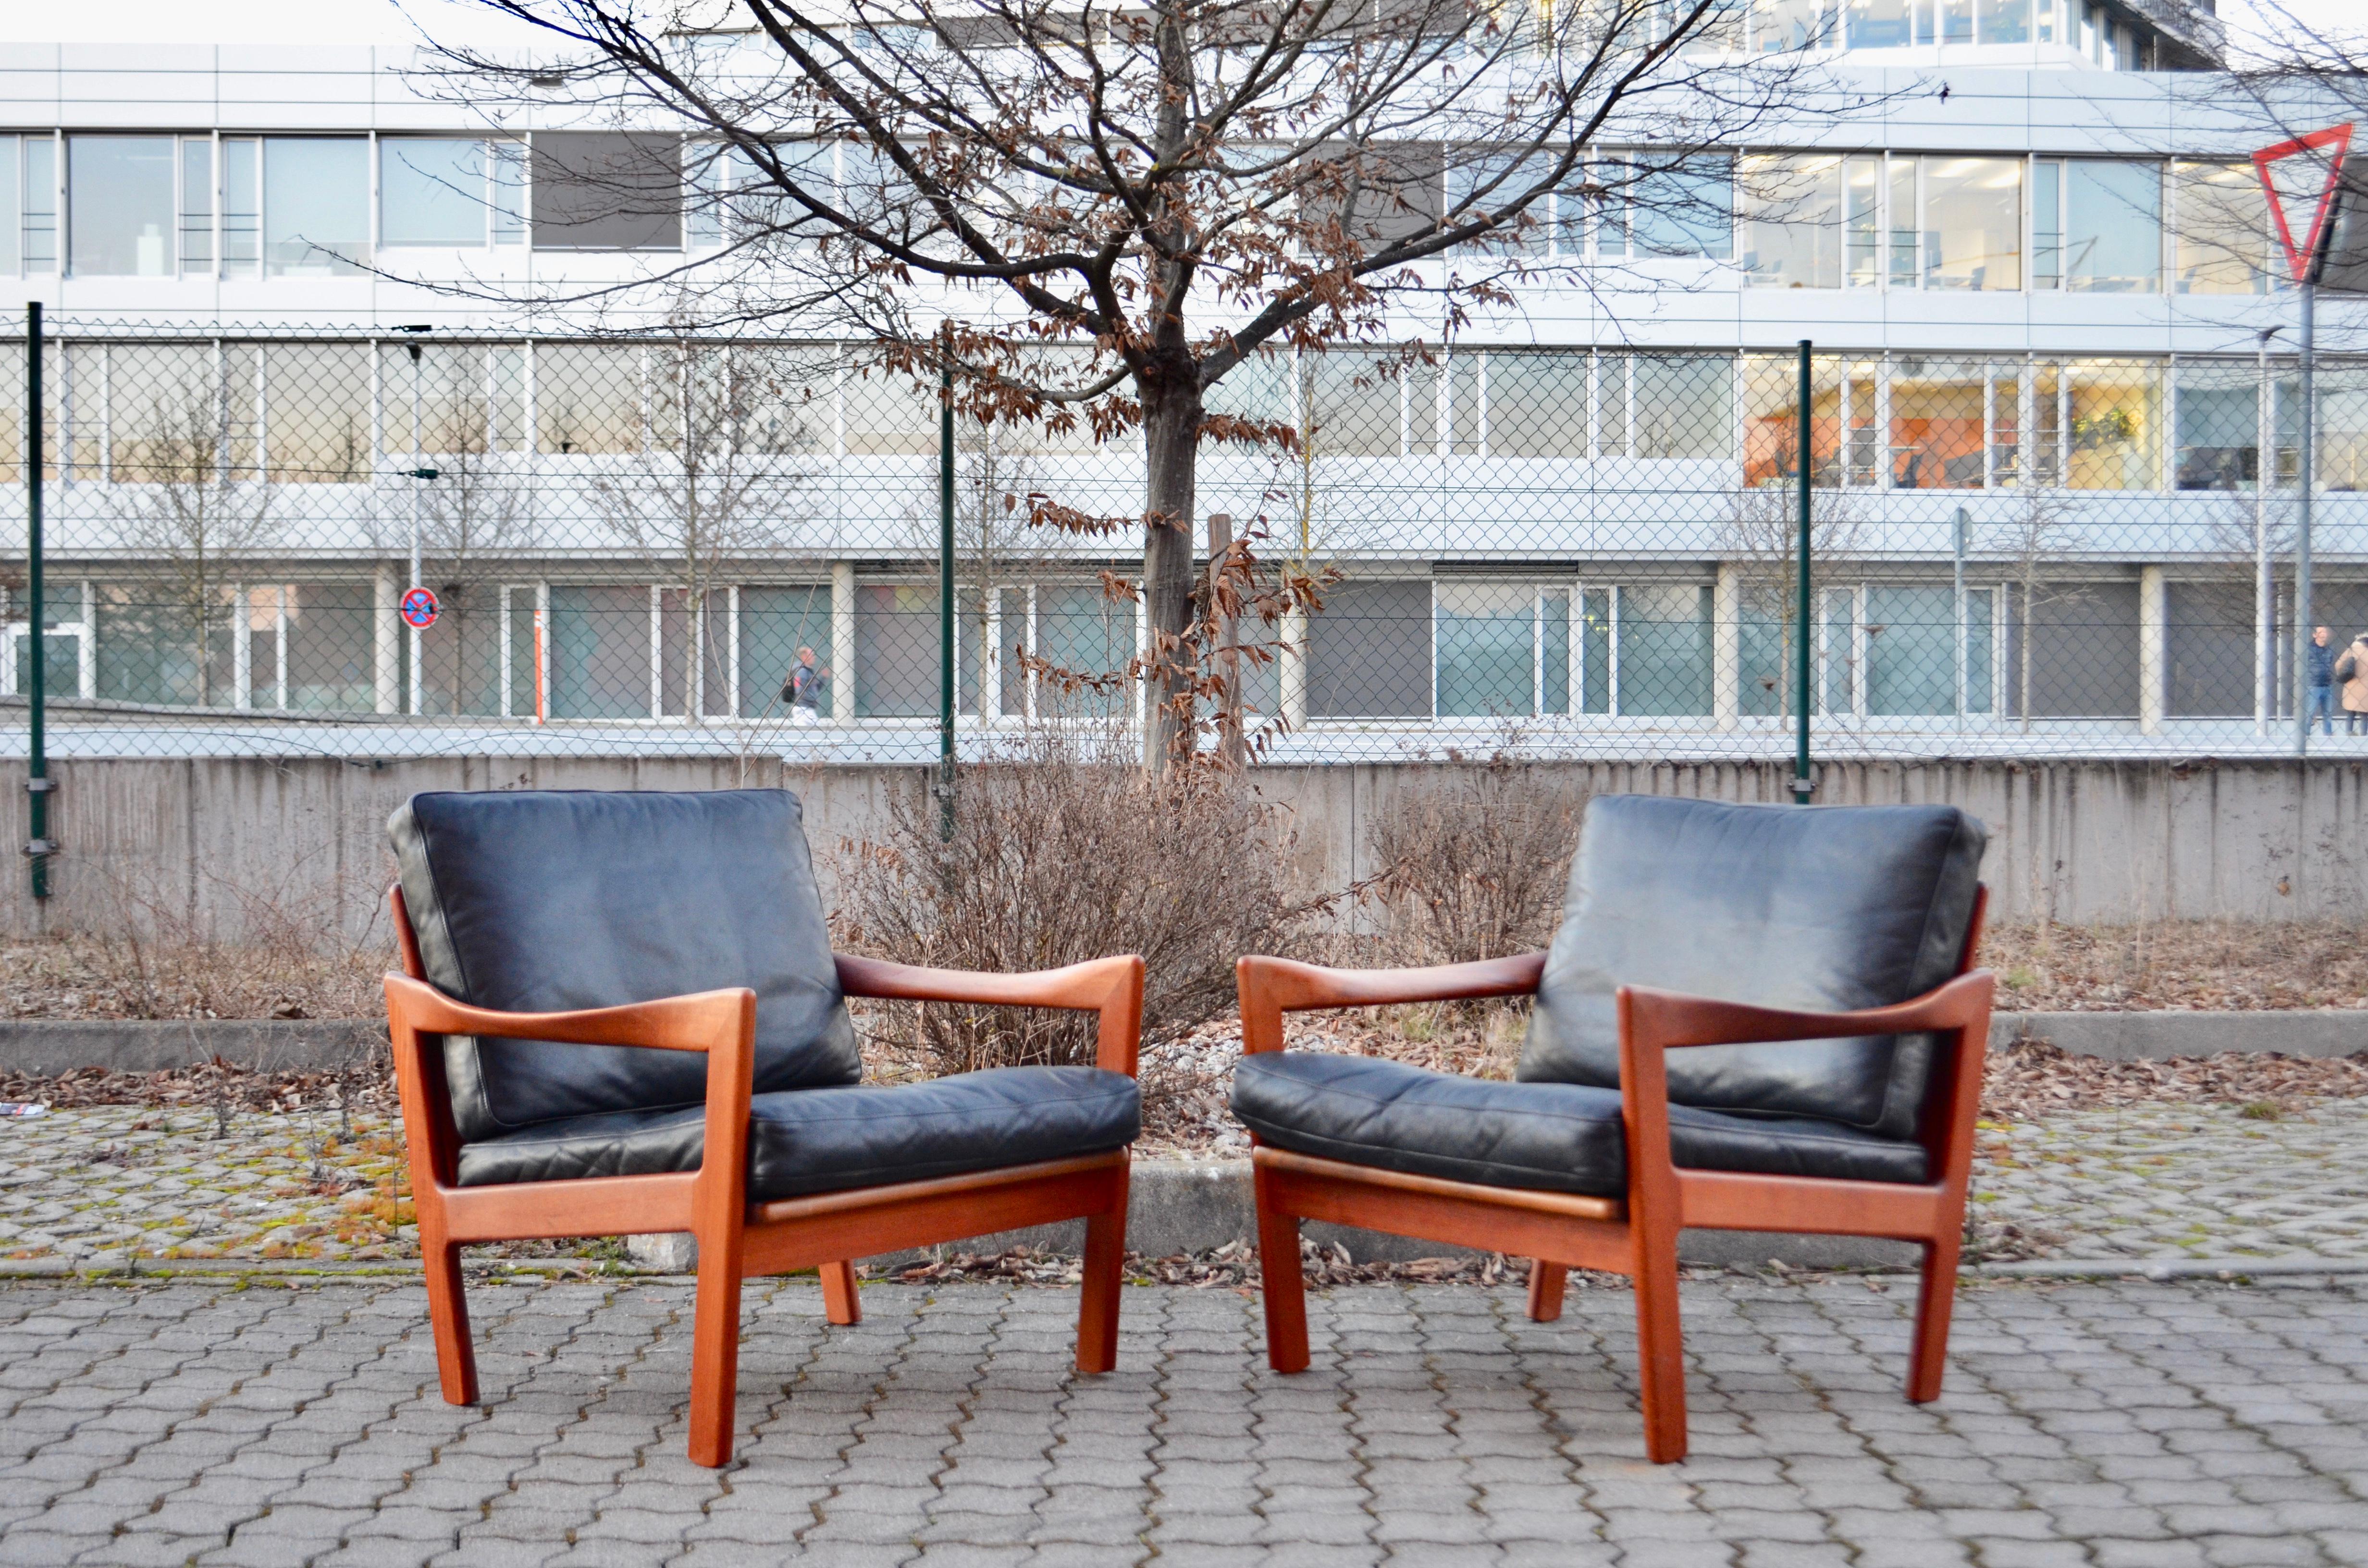 Danish modern teak chair with thick black aniline leather.
Design by Illum Wikkelsø and manufactured by Niels Eilersen.
Great comfort with organic curved armrests.
It has the Pirelli rubber underneath the seating pillow
Set of 2.